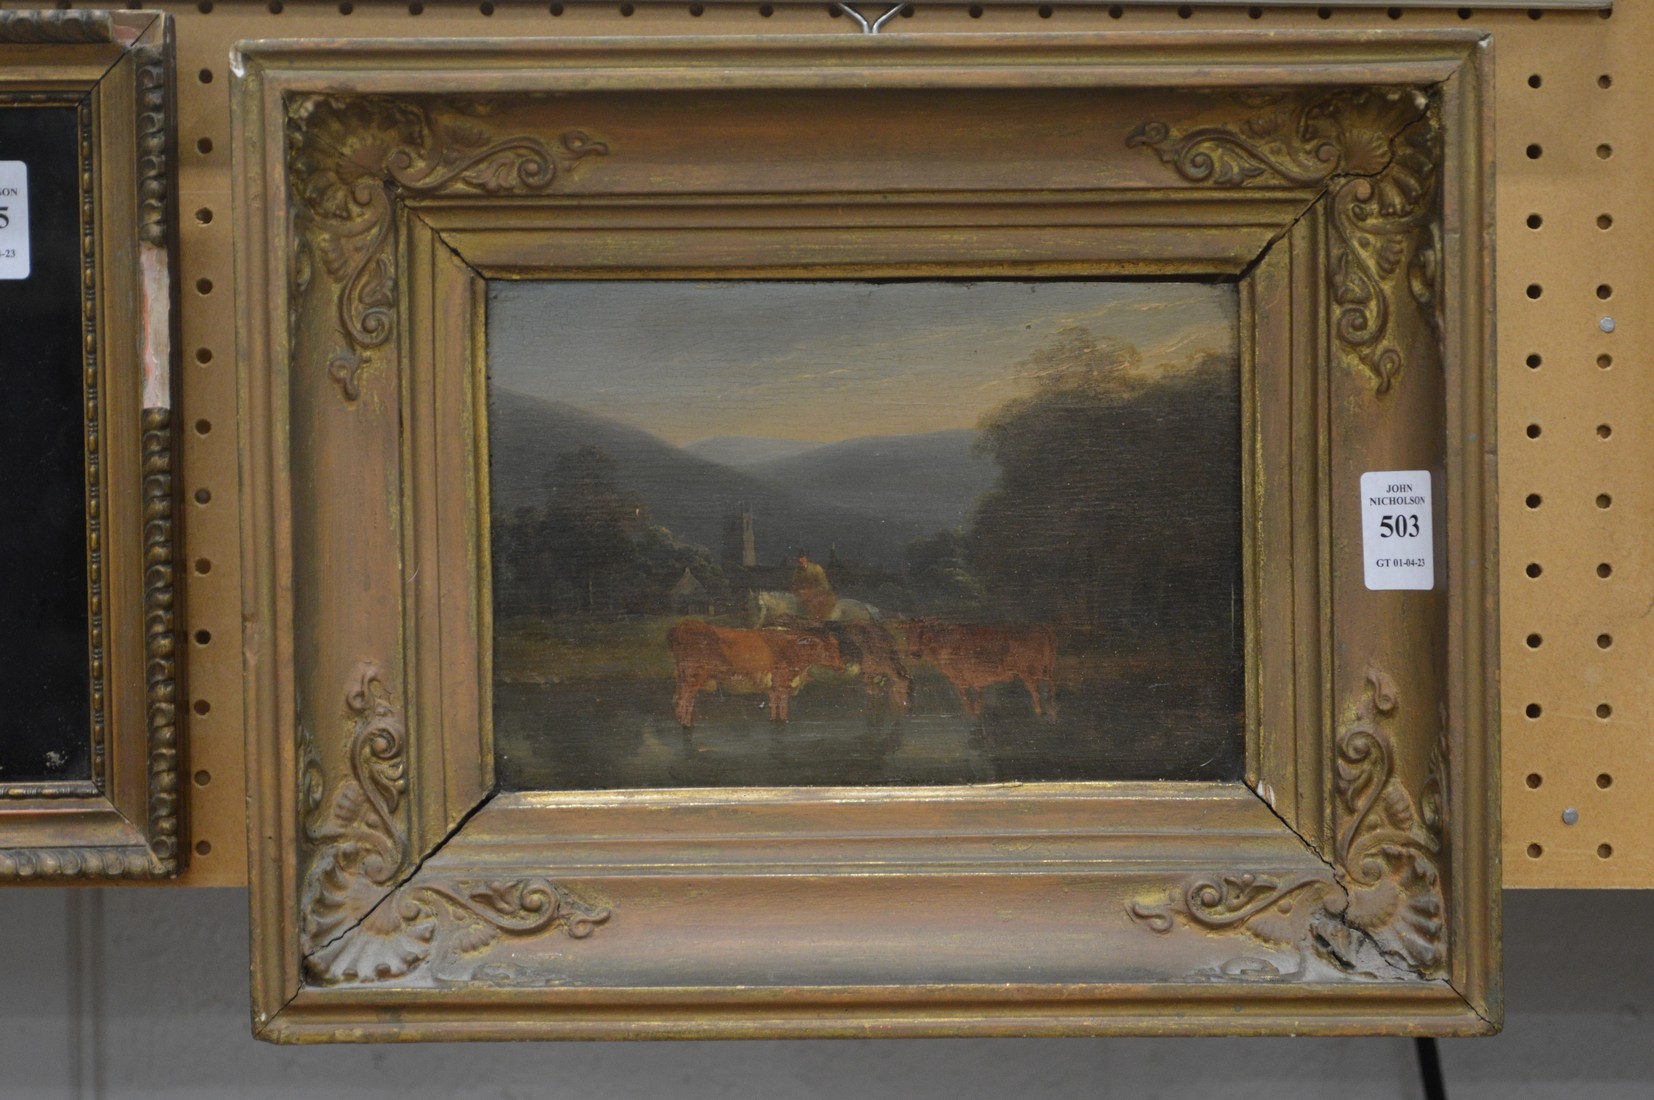 19th century English school, Cattle watering in a pond, oil on oak panel, in a decorative gilt